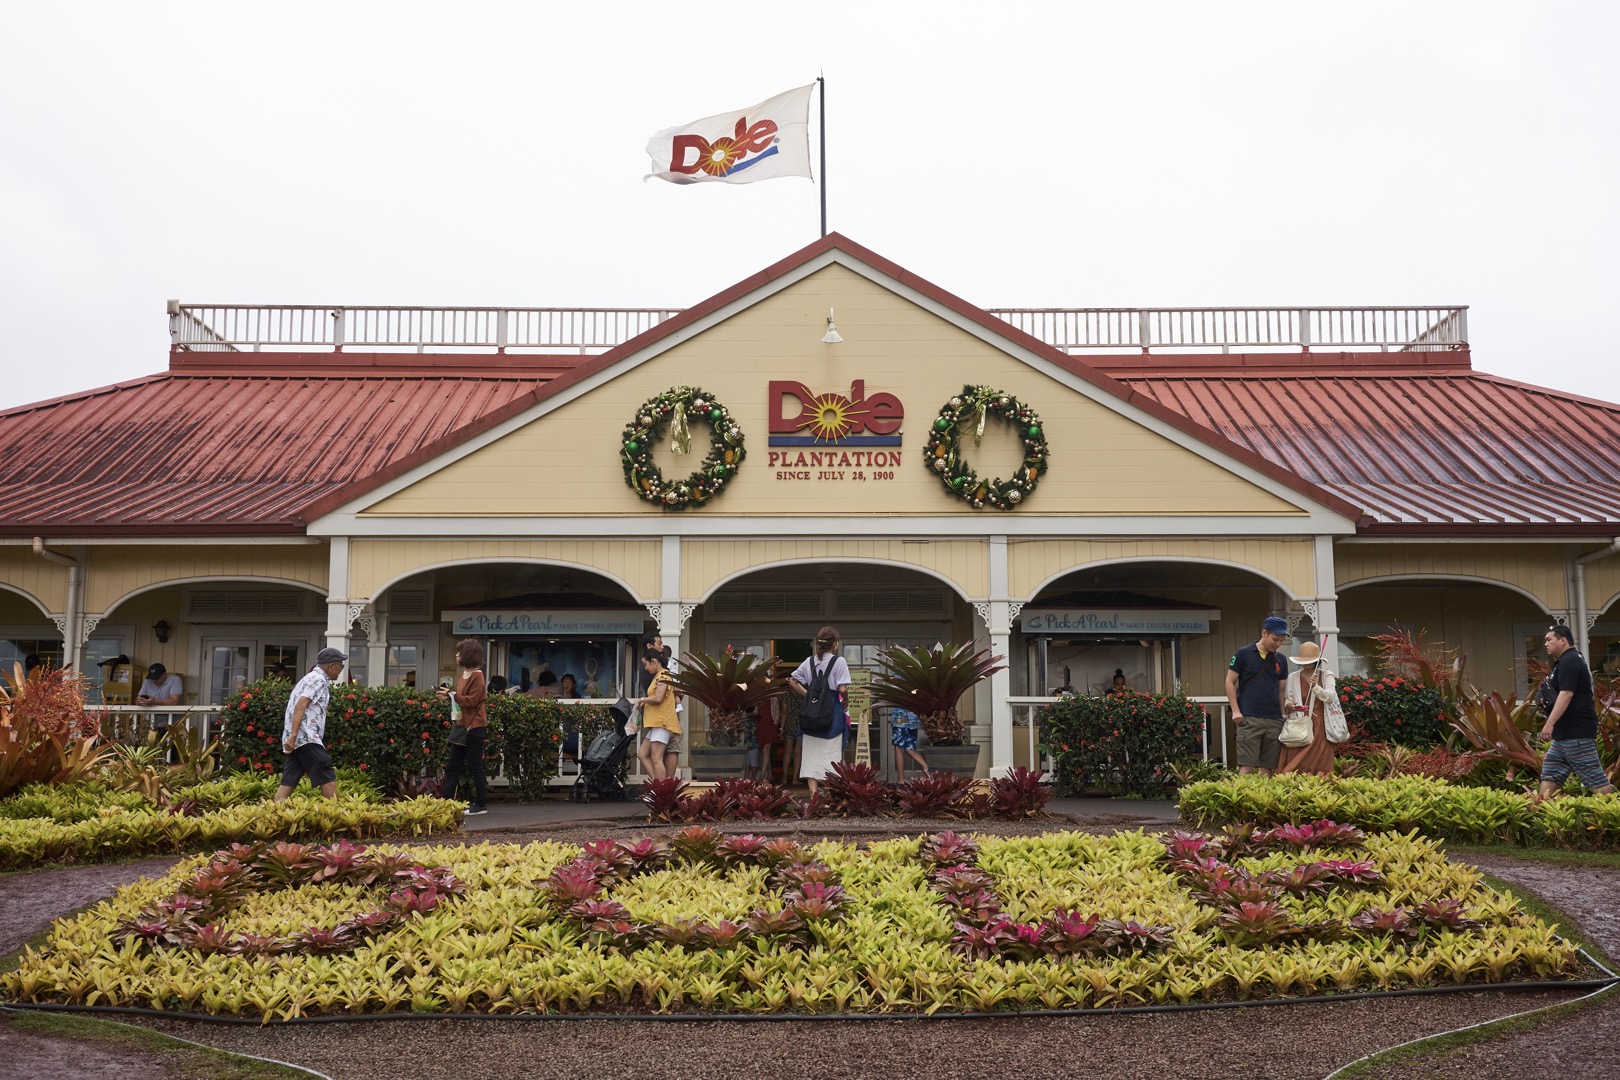 Dole Plantation Oahu Pineapple Plantation - Good place to relax and refresh - Circle Adventure